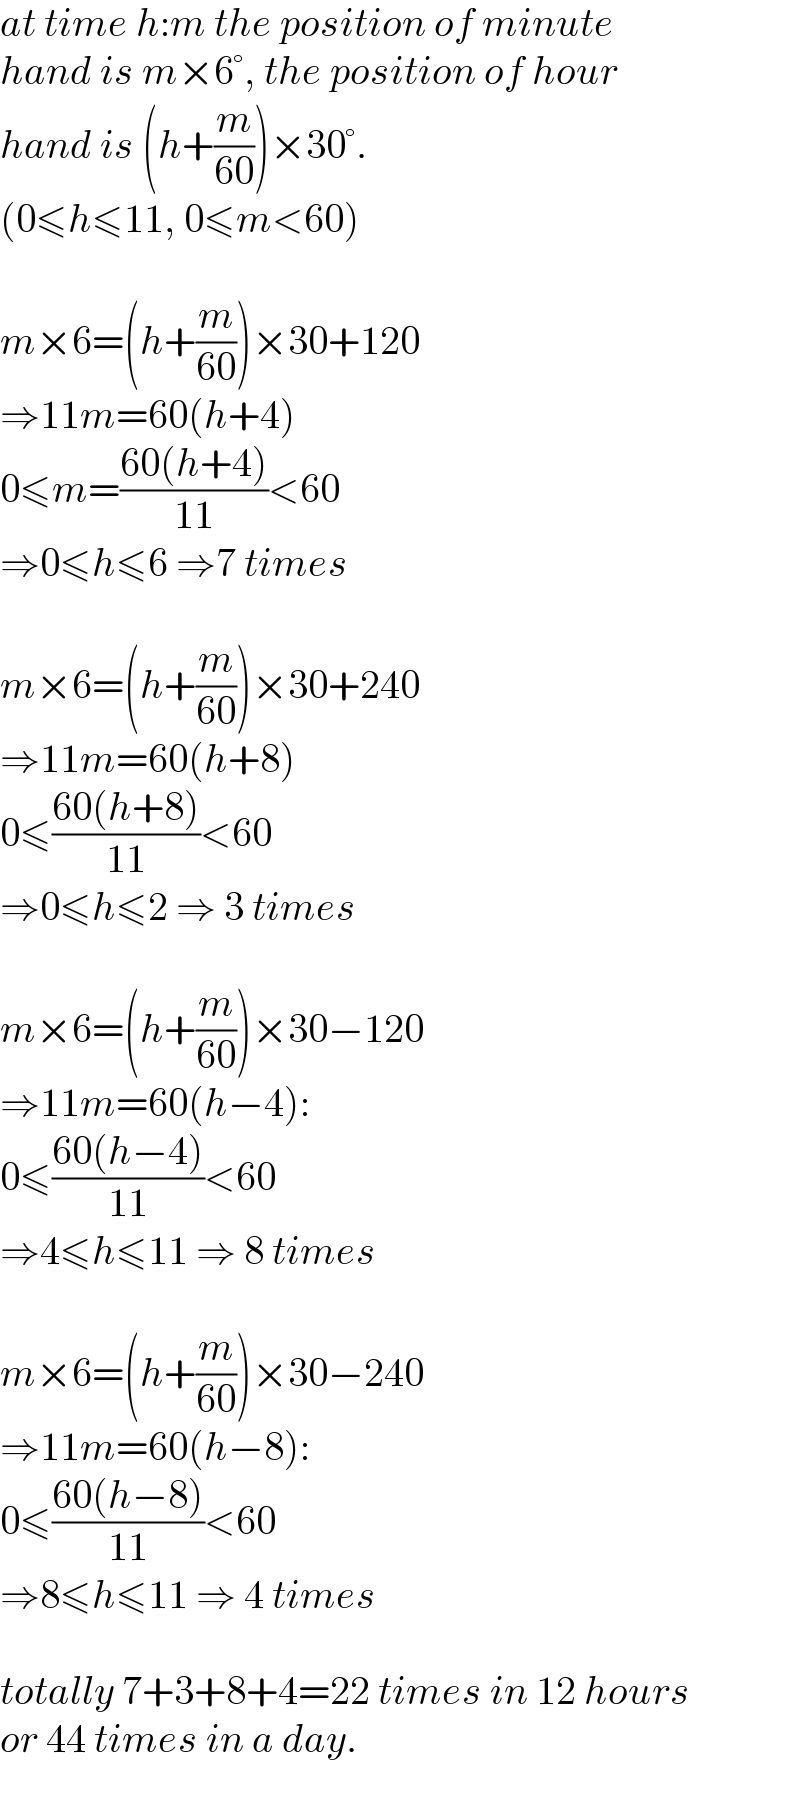 at time h:m the position of minute  hand is m×6°, the position of hour  hand is (h+(m/(60)))×30°.  (0≤h≤11, 0≤m<60)    m×6=(h+(m/(60)))×30+120  ⇒11m=60(h+4)  0≤m=((60(h+4))/(11))<60  ⇒0≤h≤6 ⇒7 times    m×6=(h+(m/(60)))×30+240  ⇒11m=60(h+8)  0≤((60(h+8))/(11))<60  ⇒0≤h≤2 ⇒ 3 times    m×6=(h+(m/(60)))×30−120  ⇒11m=60(h−4):  0≤((60(h−4))/(11))<60  ⇒4≤h≤11 ⇒ 8 times    m×6=(h+(m/(60)))×30−240  ⇒11m=60(h−8):  0≤((60(h−8))/(11))<60  ⇒8≤h≤11 ⇒ 4 times    totally 7+3+8+4=22 times in 12 hours  or 44 times in a day.  